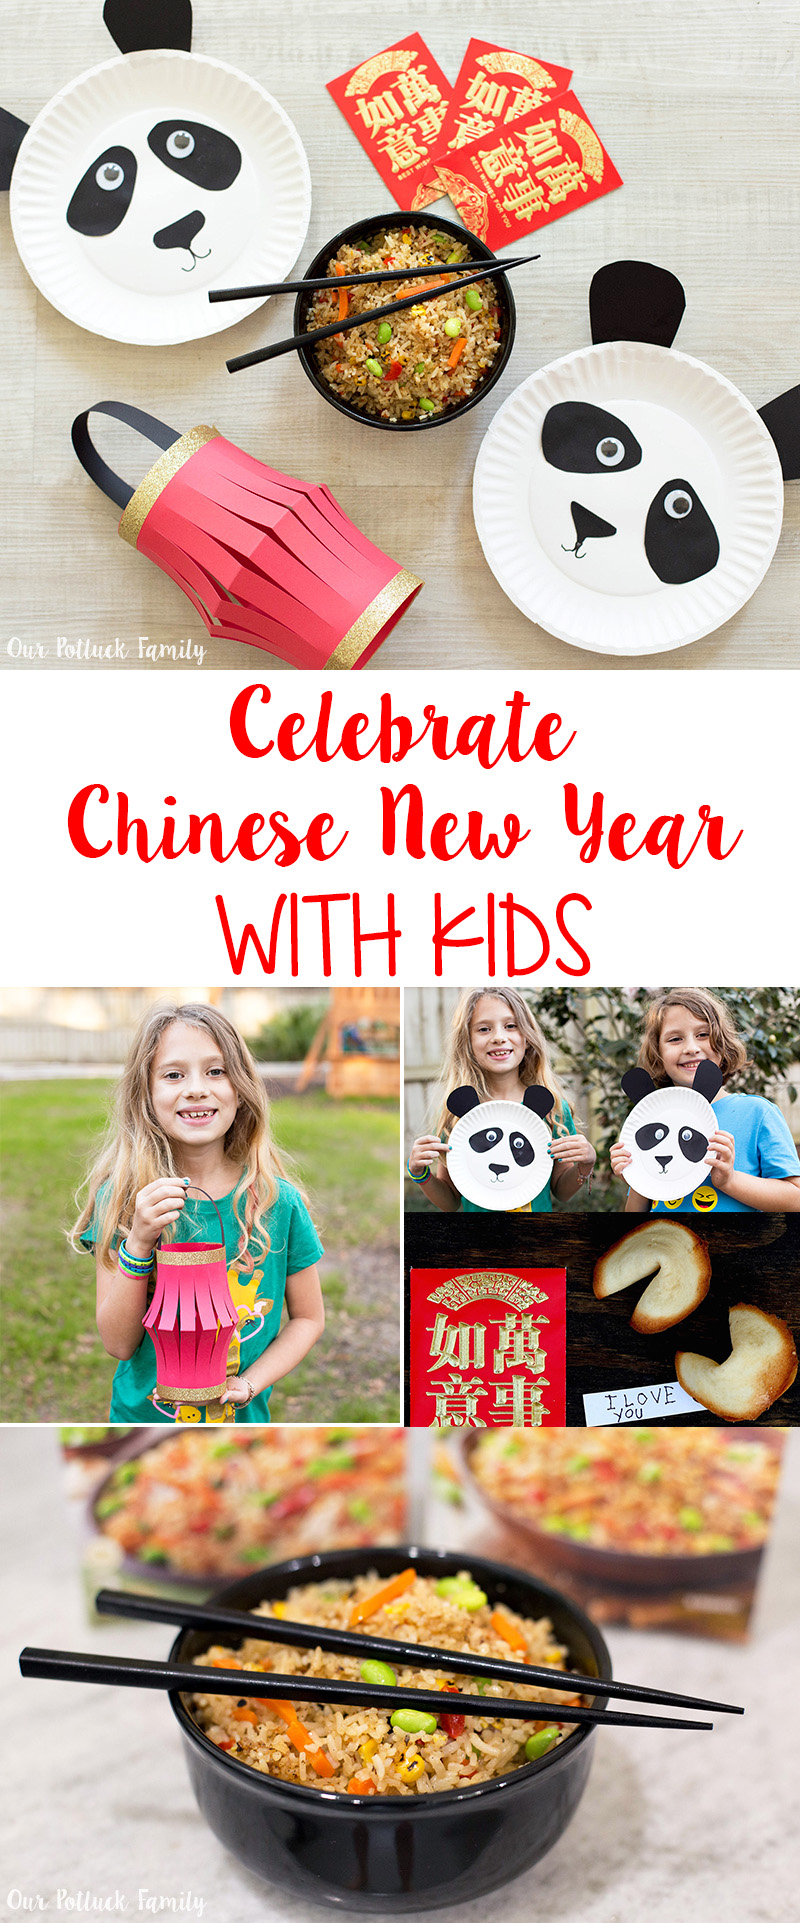 Celebrate Chinese New Year with Kids